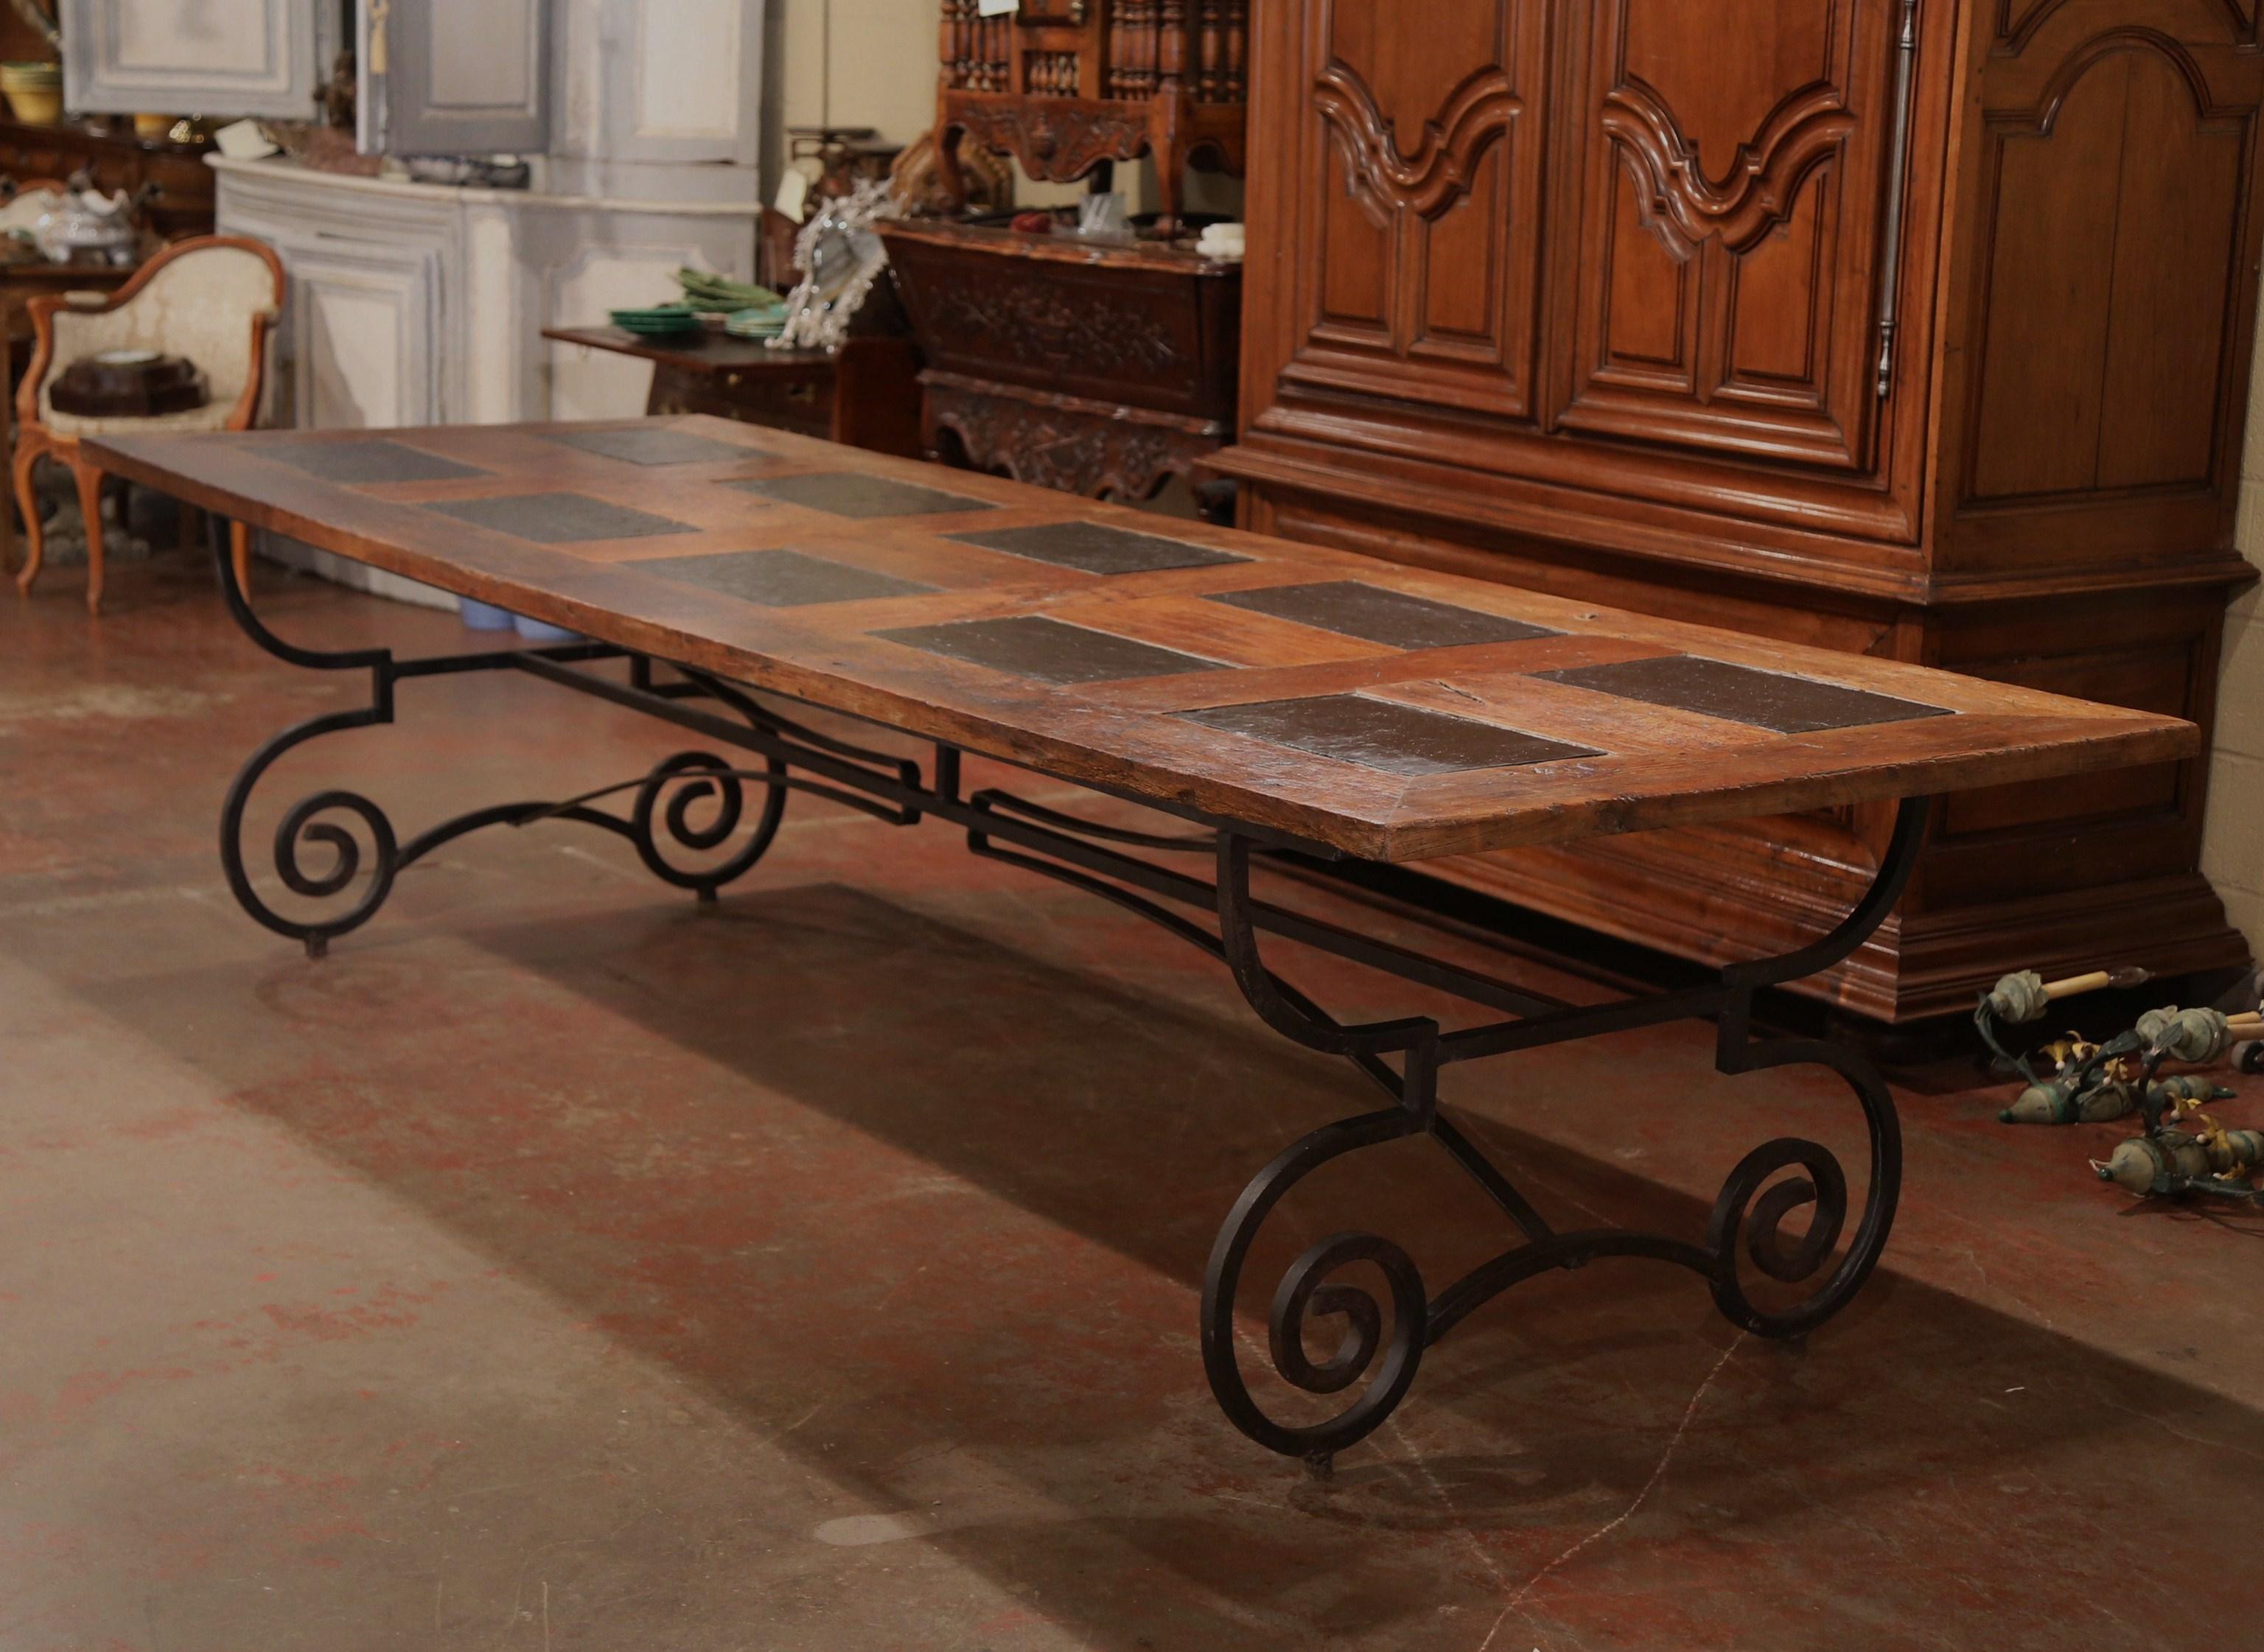 This large and long, antique dining room table was crafted in the French Pyrenees. The top plank is made from 18th century chestnut wood, and is decorated with eight large slate tiles on the surface for a symmetrical, geometric effect. The wide